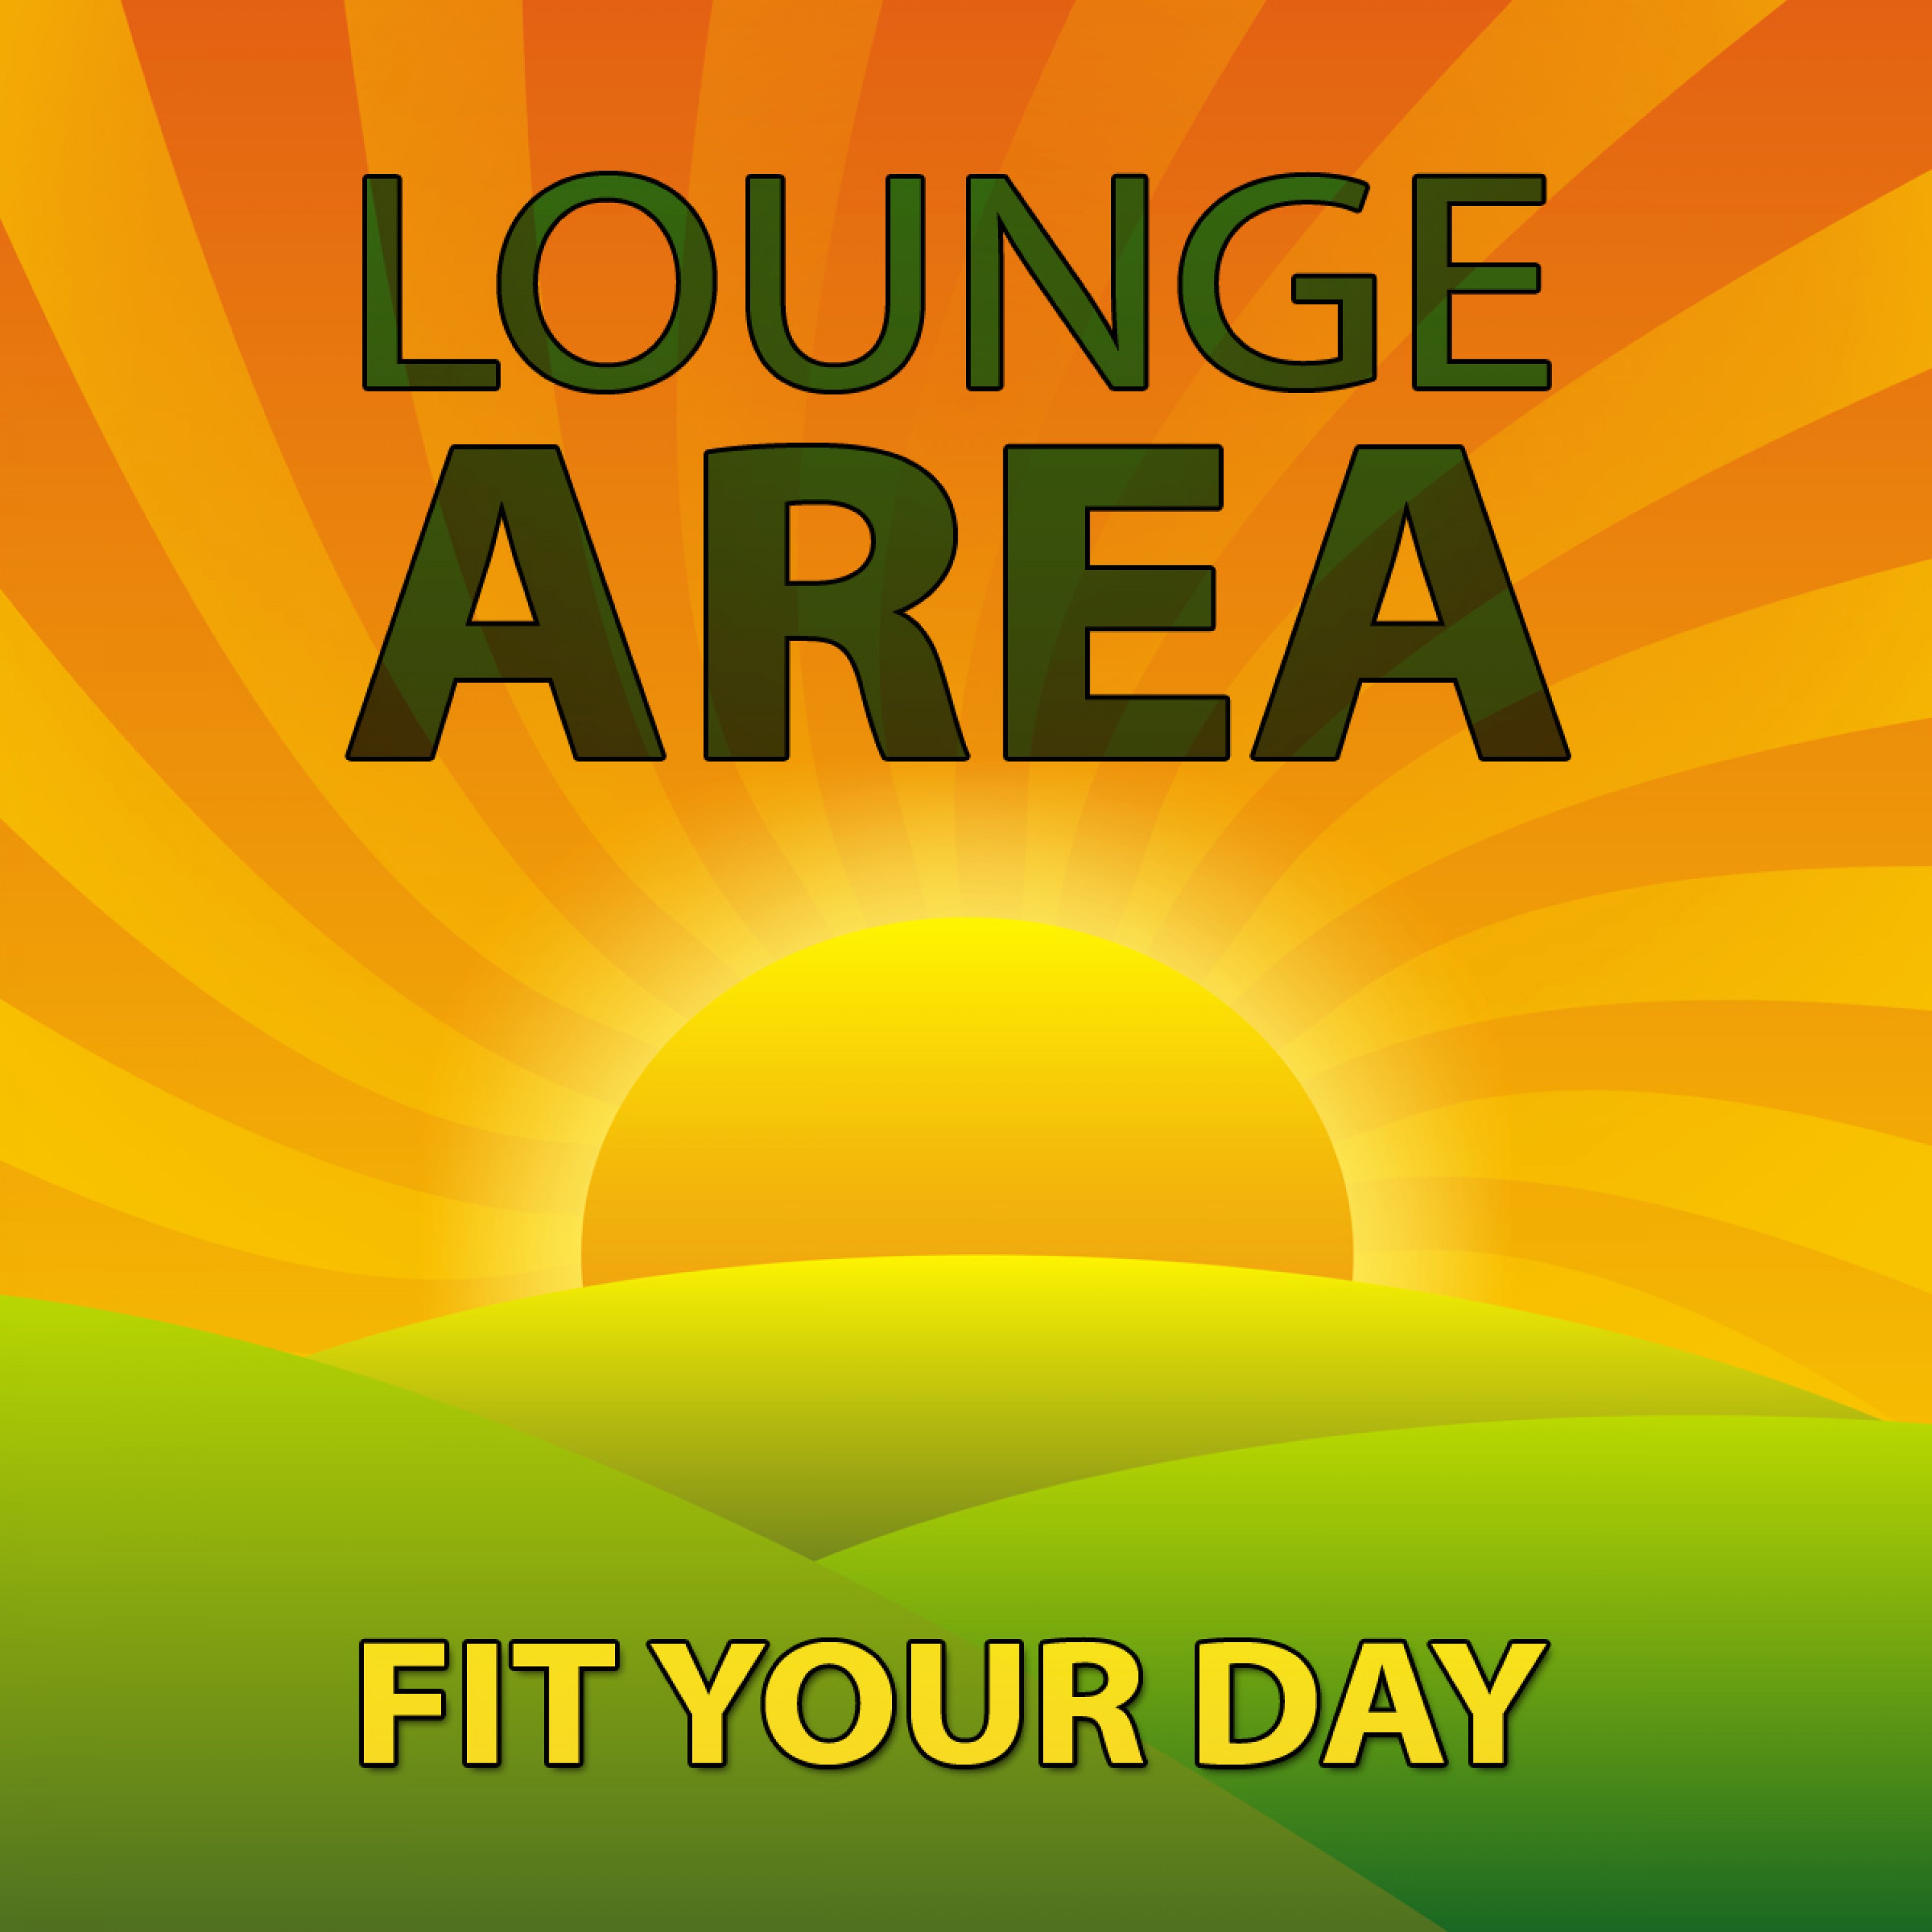 Lounge Area - Fit Your Day